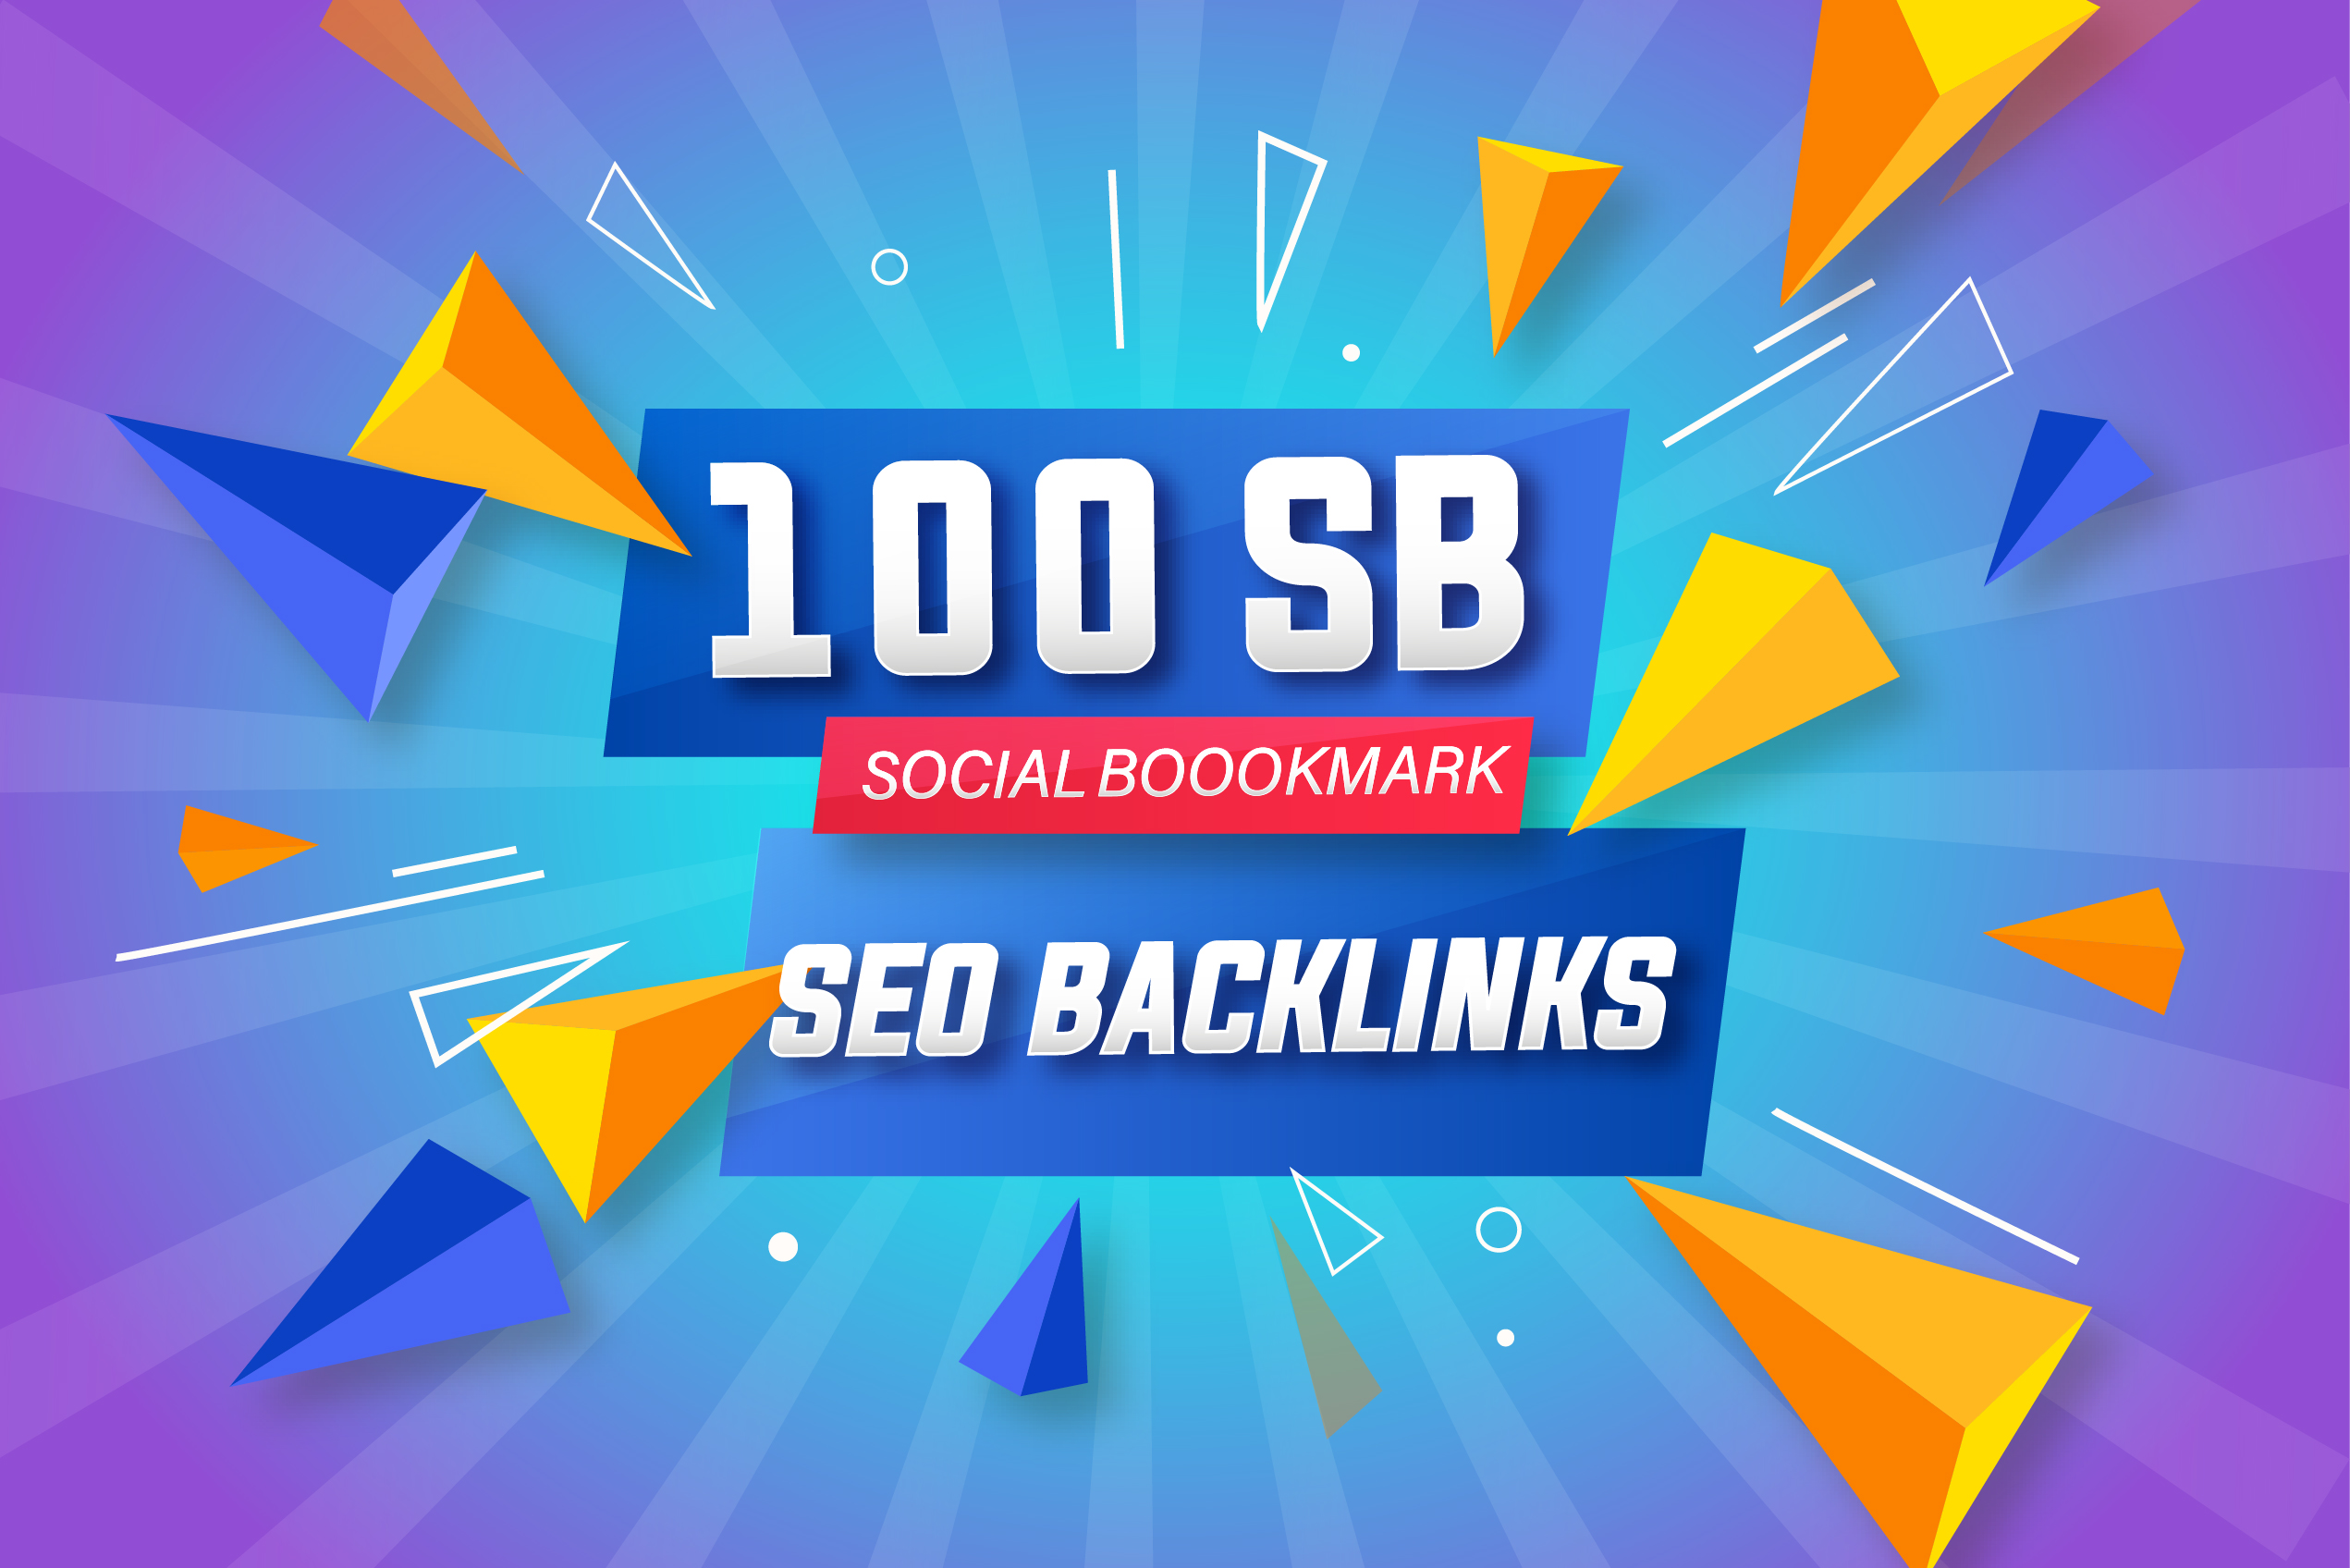 I Will Submit Manual 100 High Quality Social Bookmarking ON Social Media Marketing